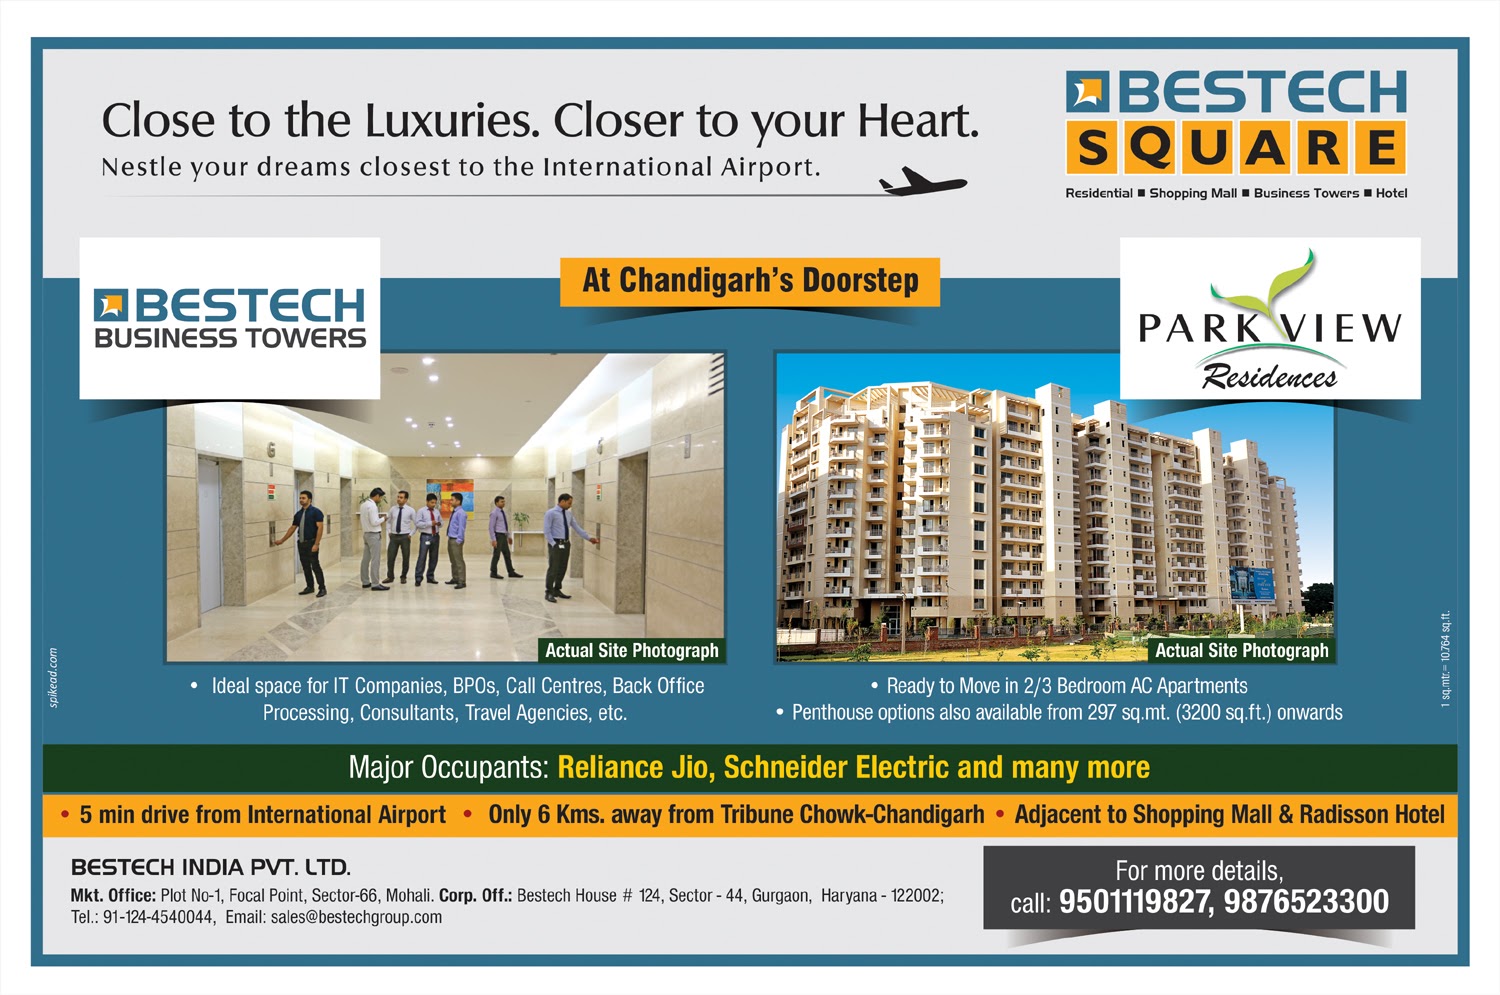 Bestech business tower Mohali ad